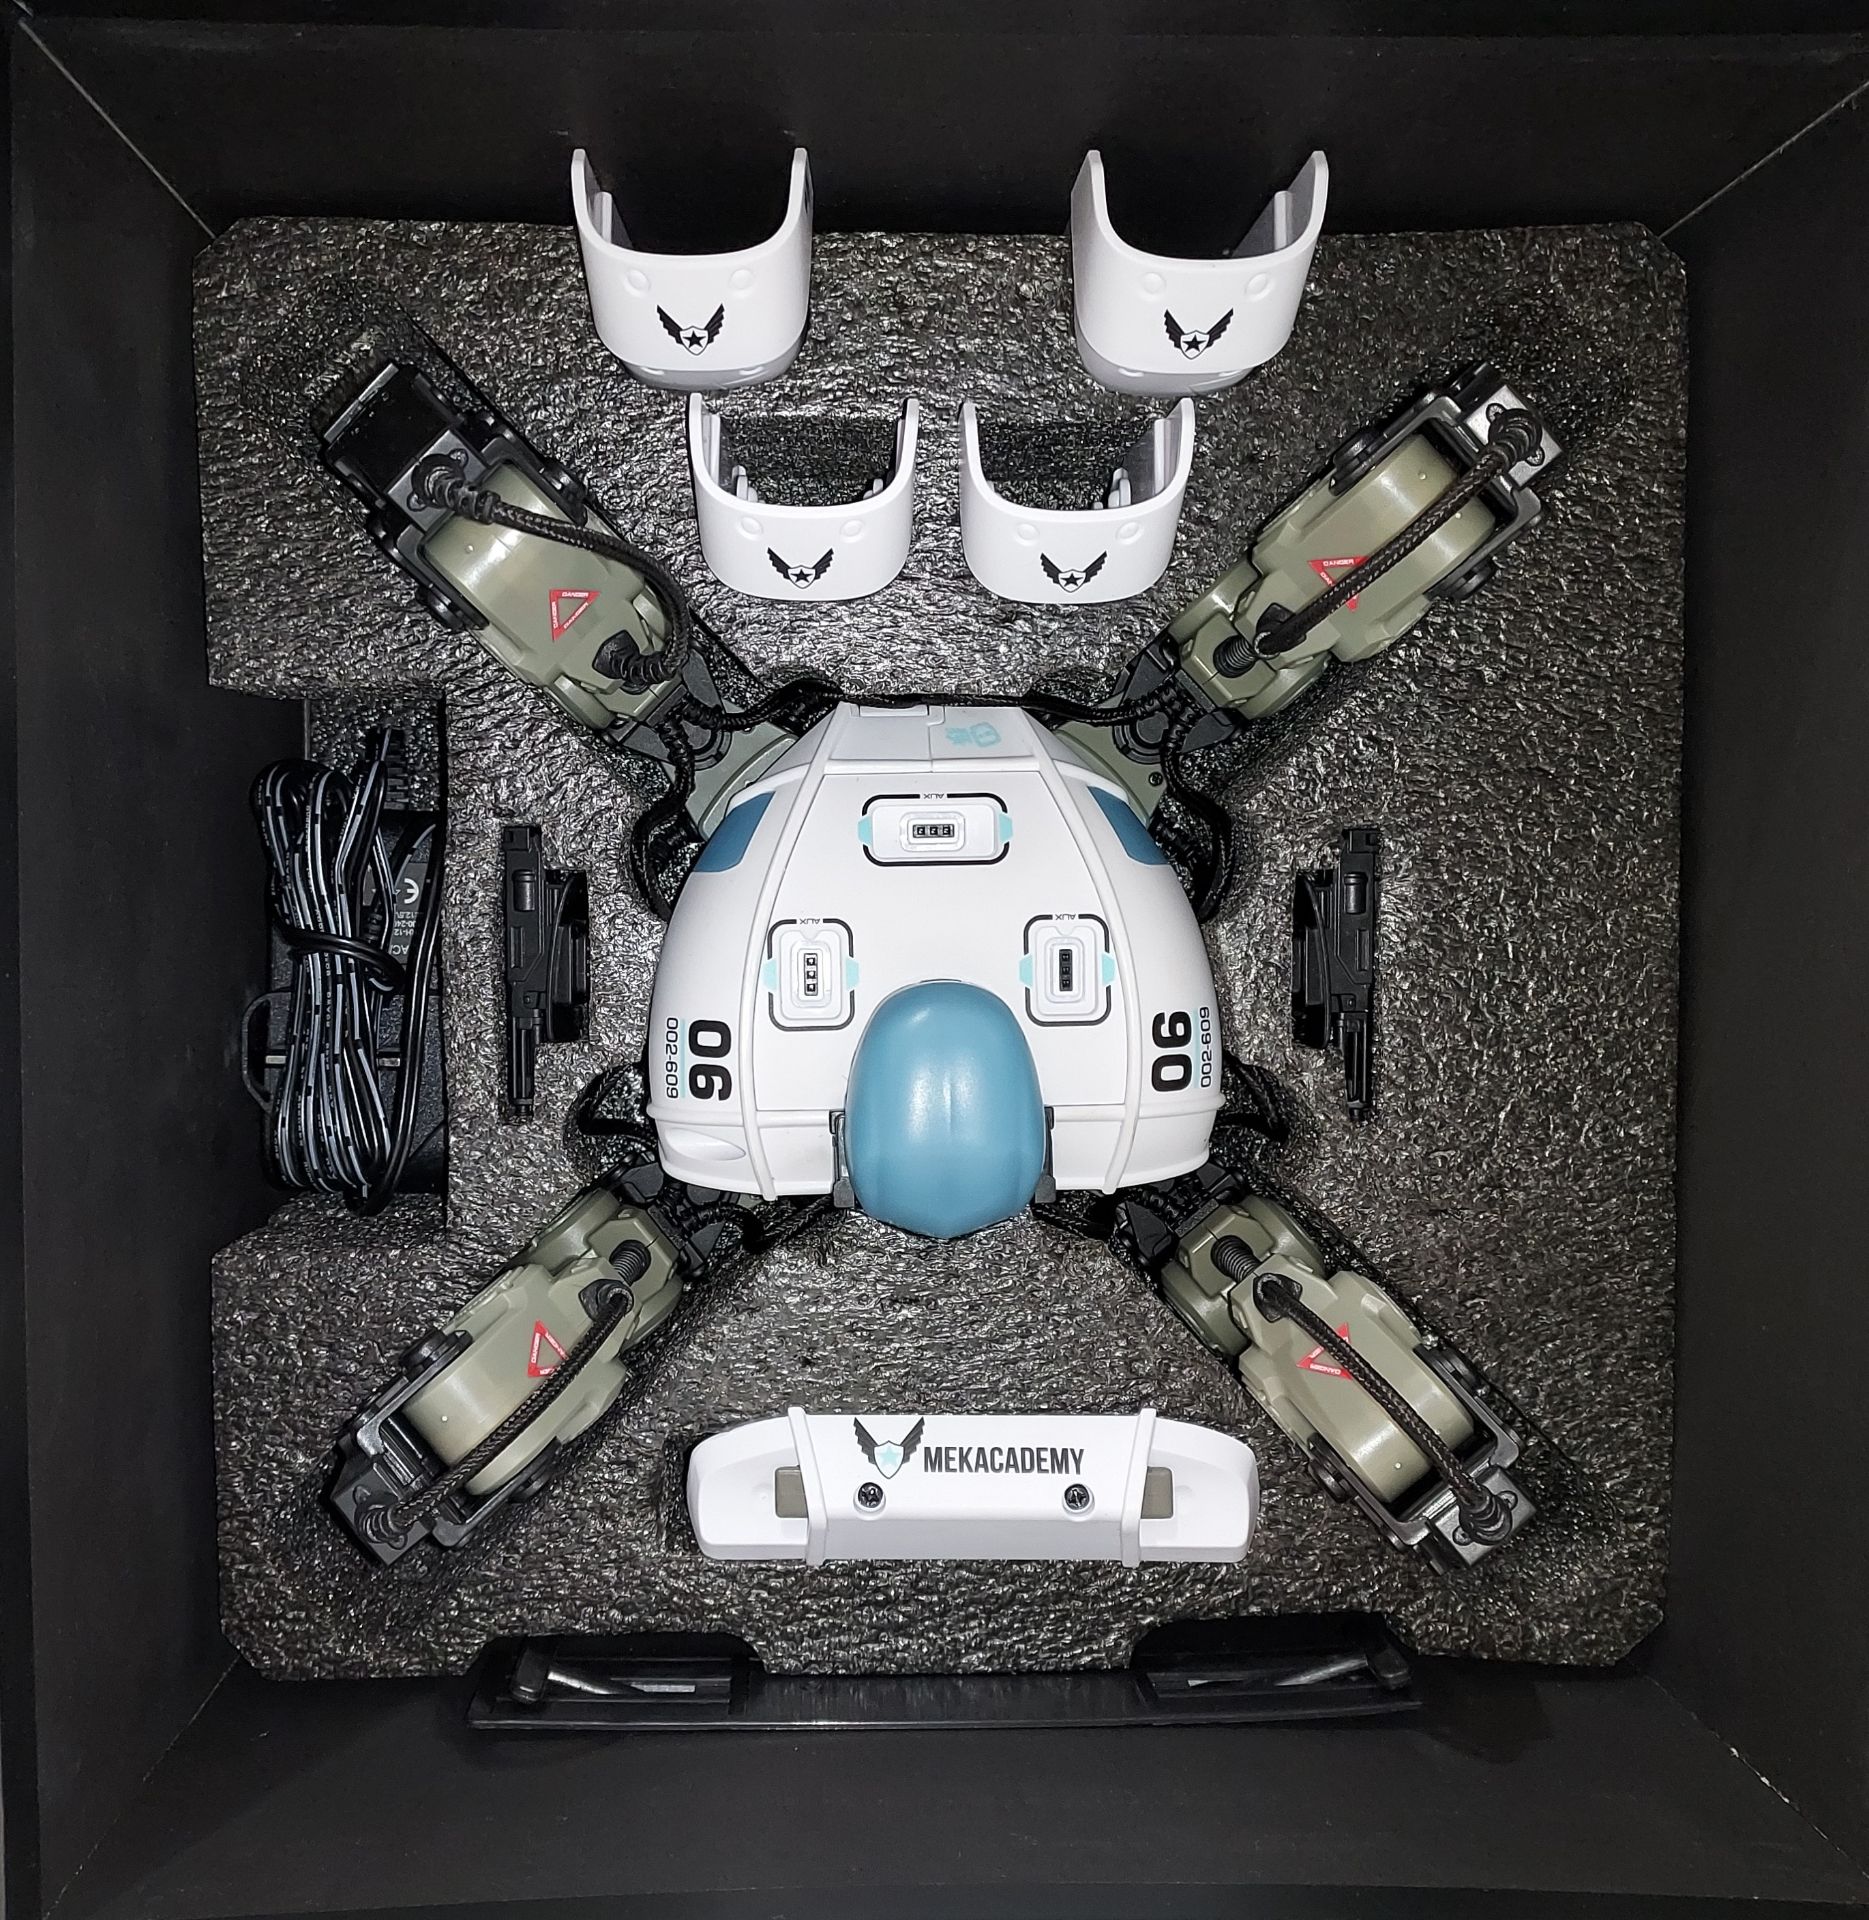 3 X MEKAMON NEXT LEVEL ROBOTICS GAMING AR (PLEASE NOTE BATTERIES HAVE EXCEEDED EXPIRATION DATE) - - Image 3 of 4